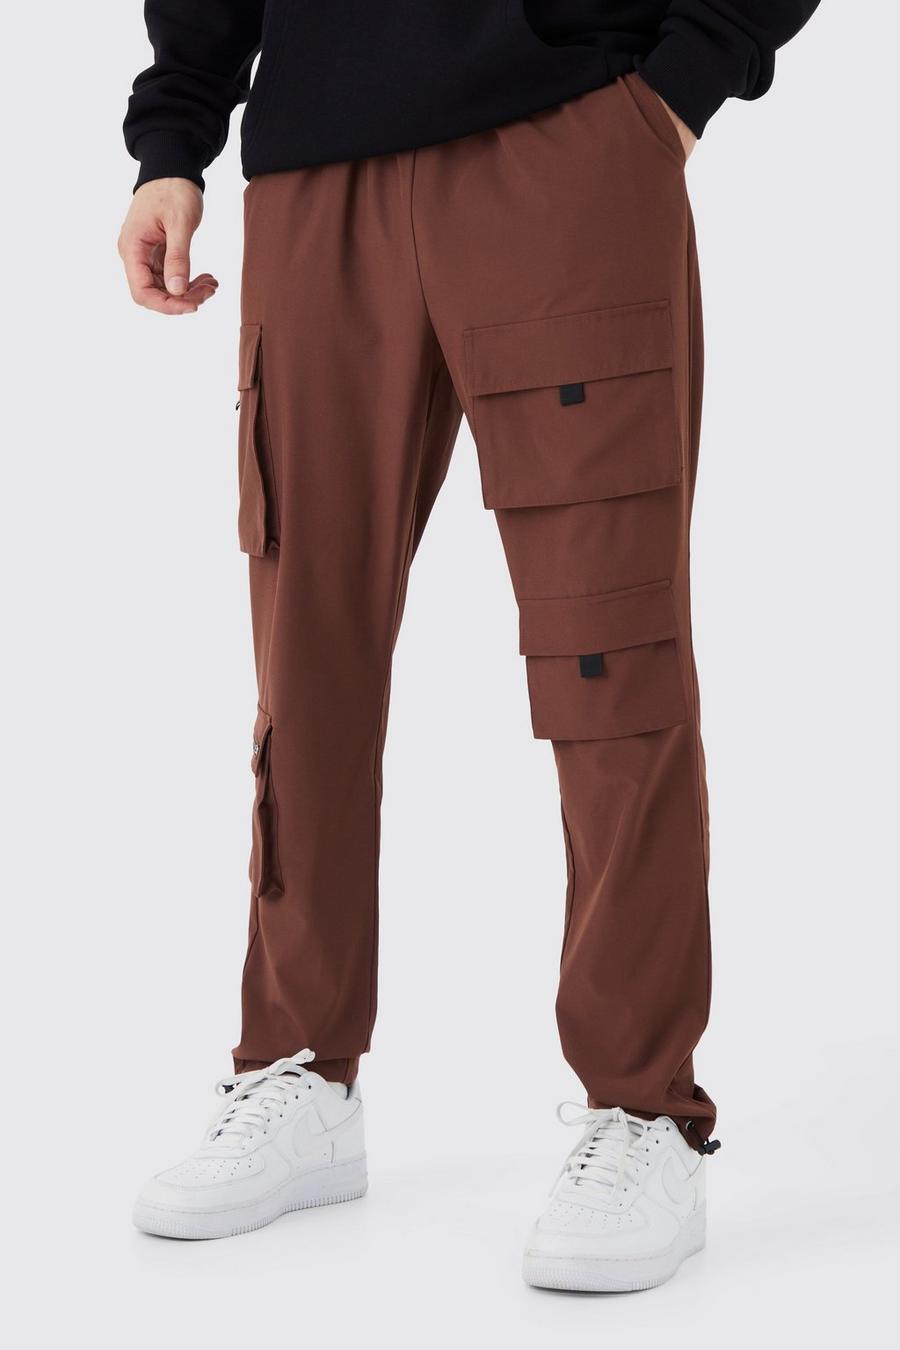 Chocolate Tall Slim Multi Pocket Cargo Stretch Pants image number 1